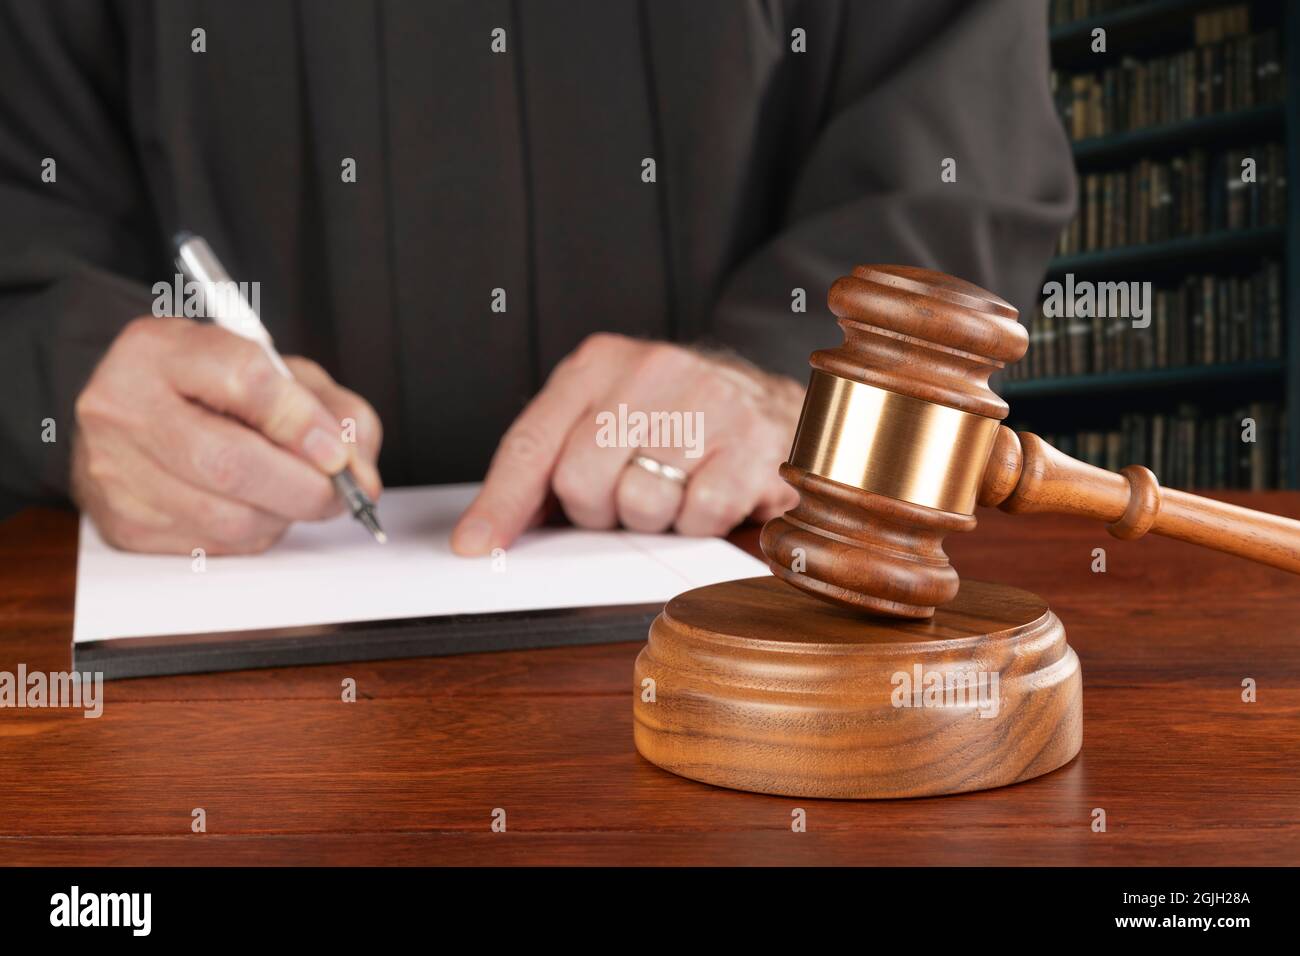 A gavel and block rests on a judge's desk while the magistrate takes notes in his law library preparing to oversee a case. Good for legal inferences. Stock Photo